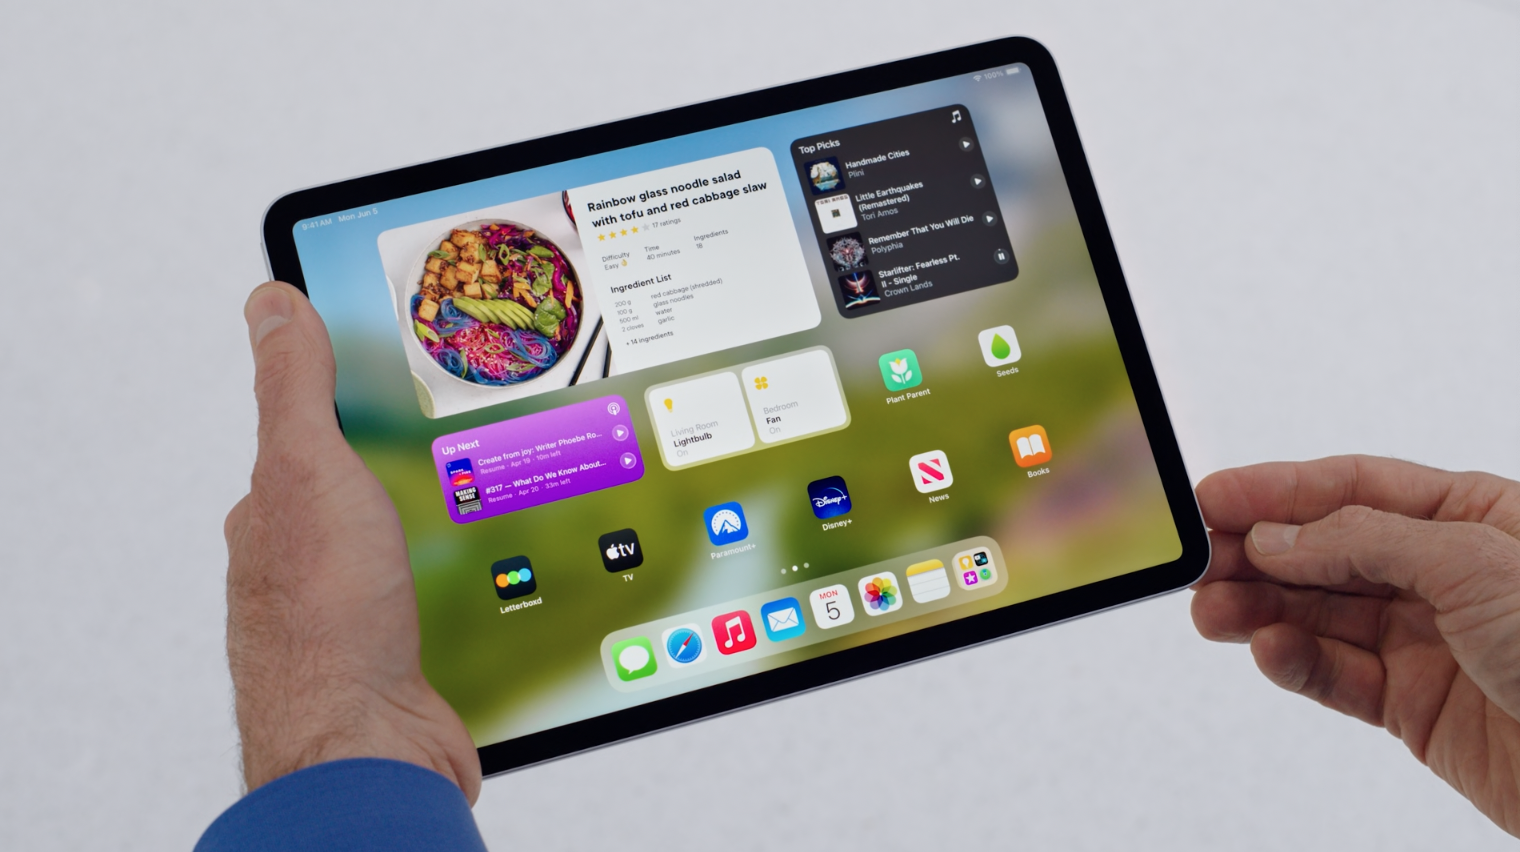 Apple iPad Pro (6th Gen, 2022) Review: Another Minor Update